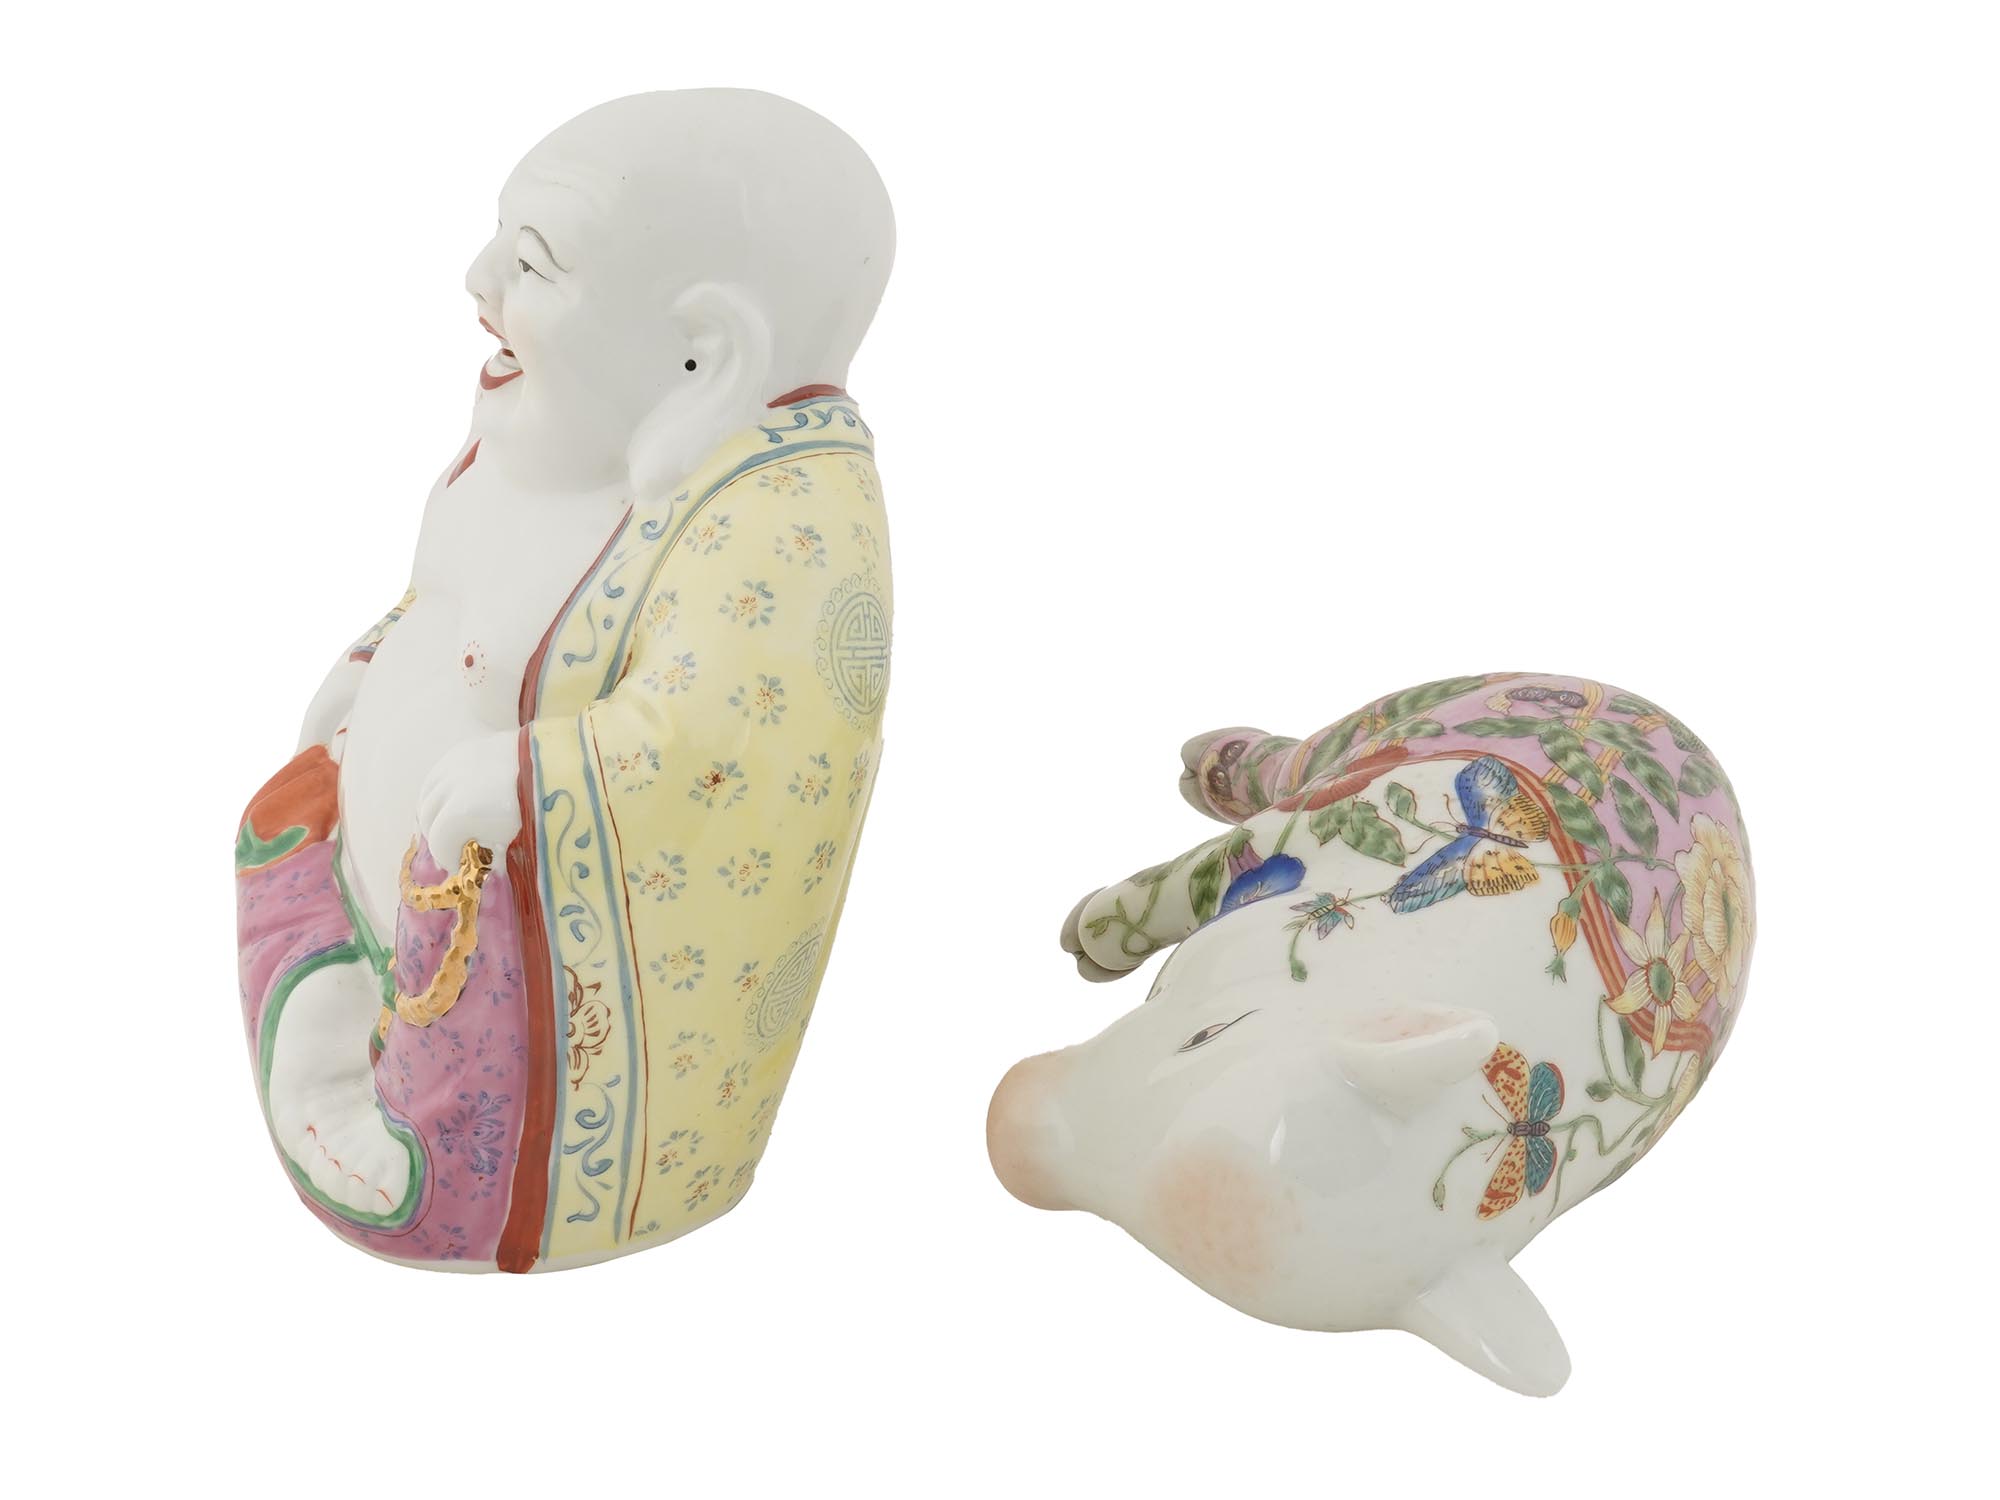 VINTAGE ASIAN PORCELAIN BUDDHA AND PIG FIGURINES PIC-2